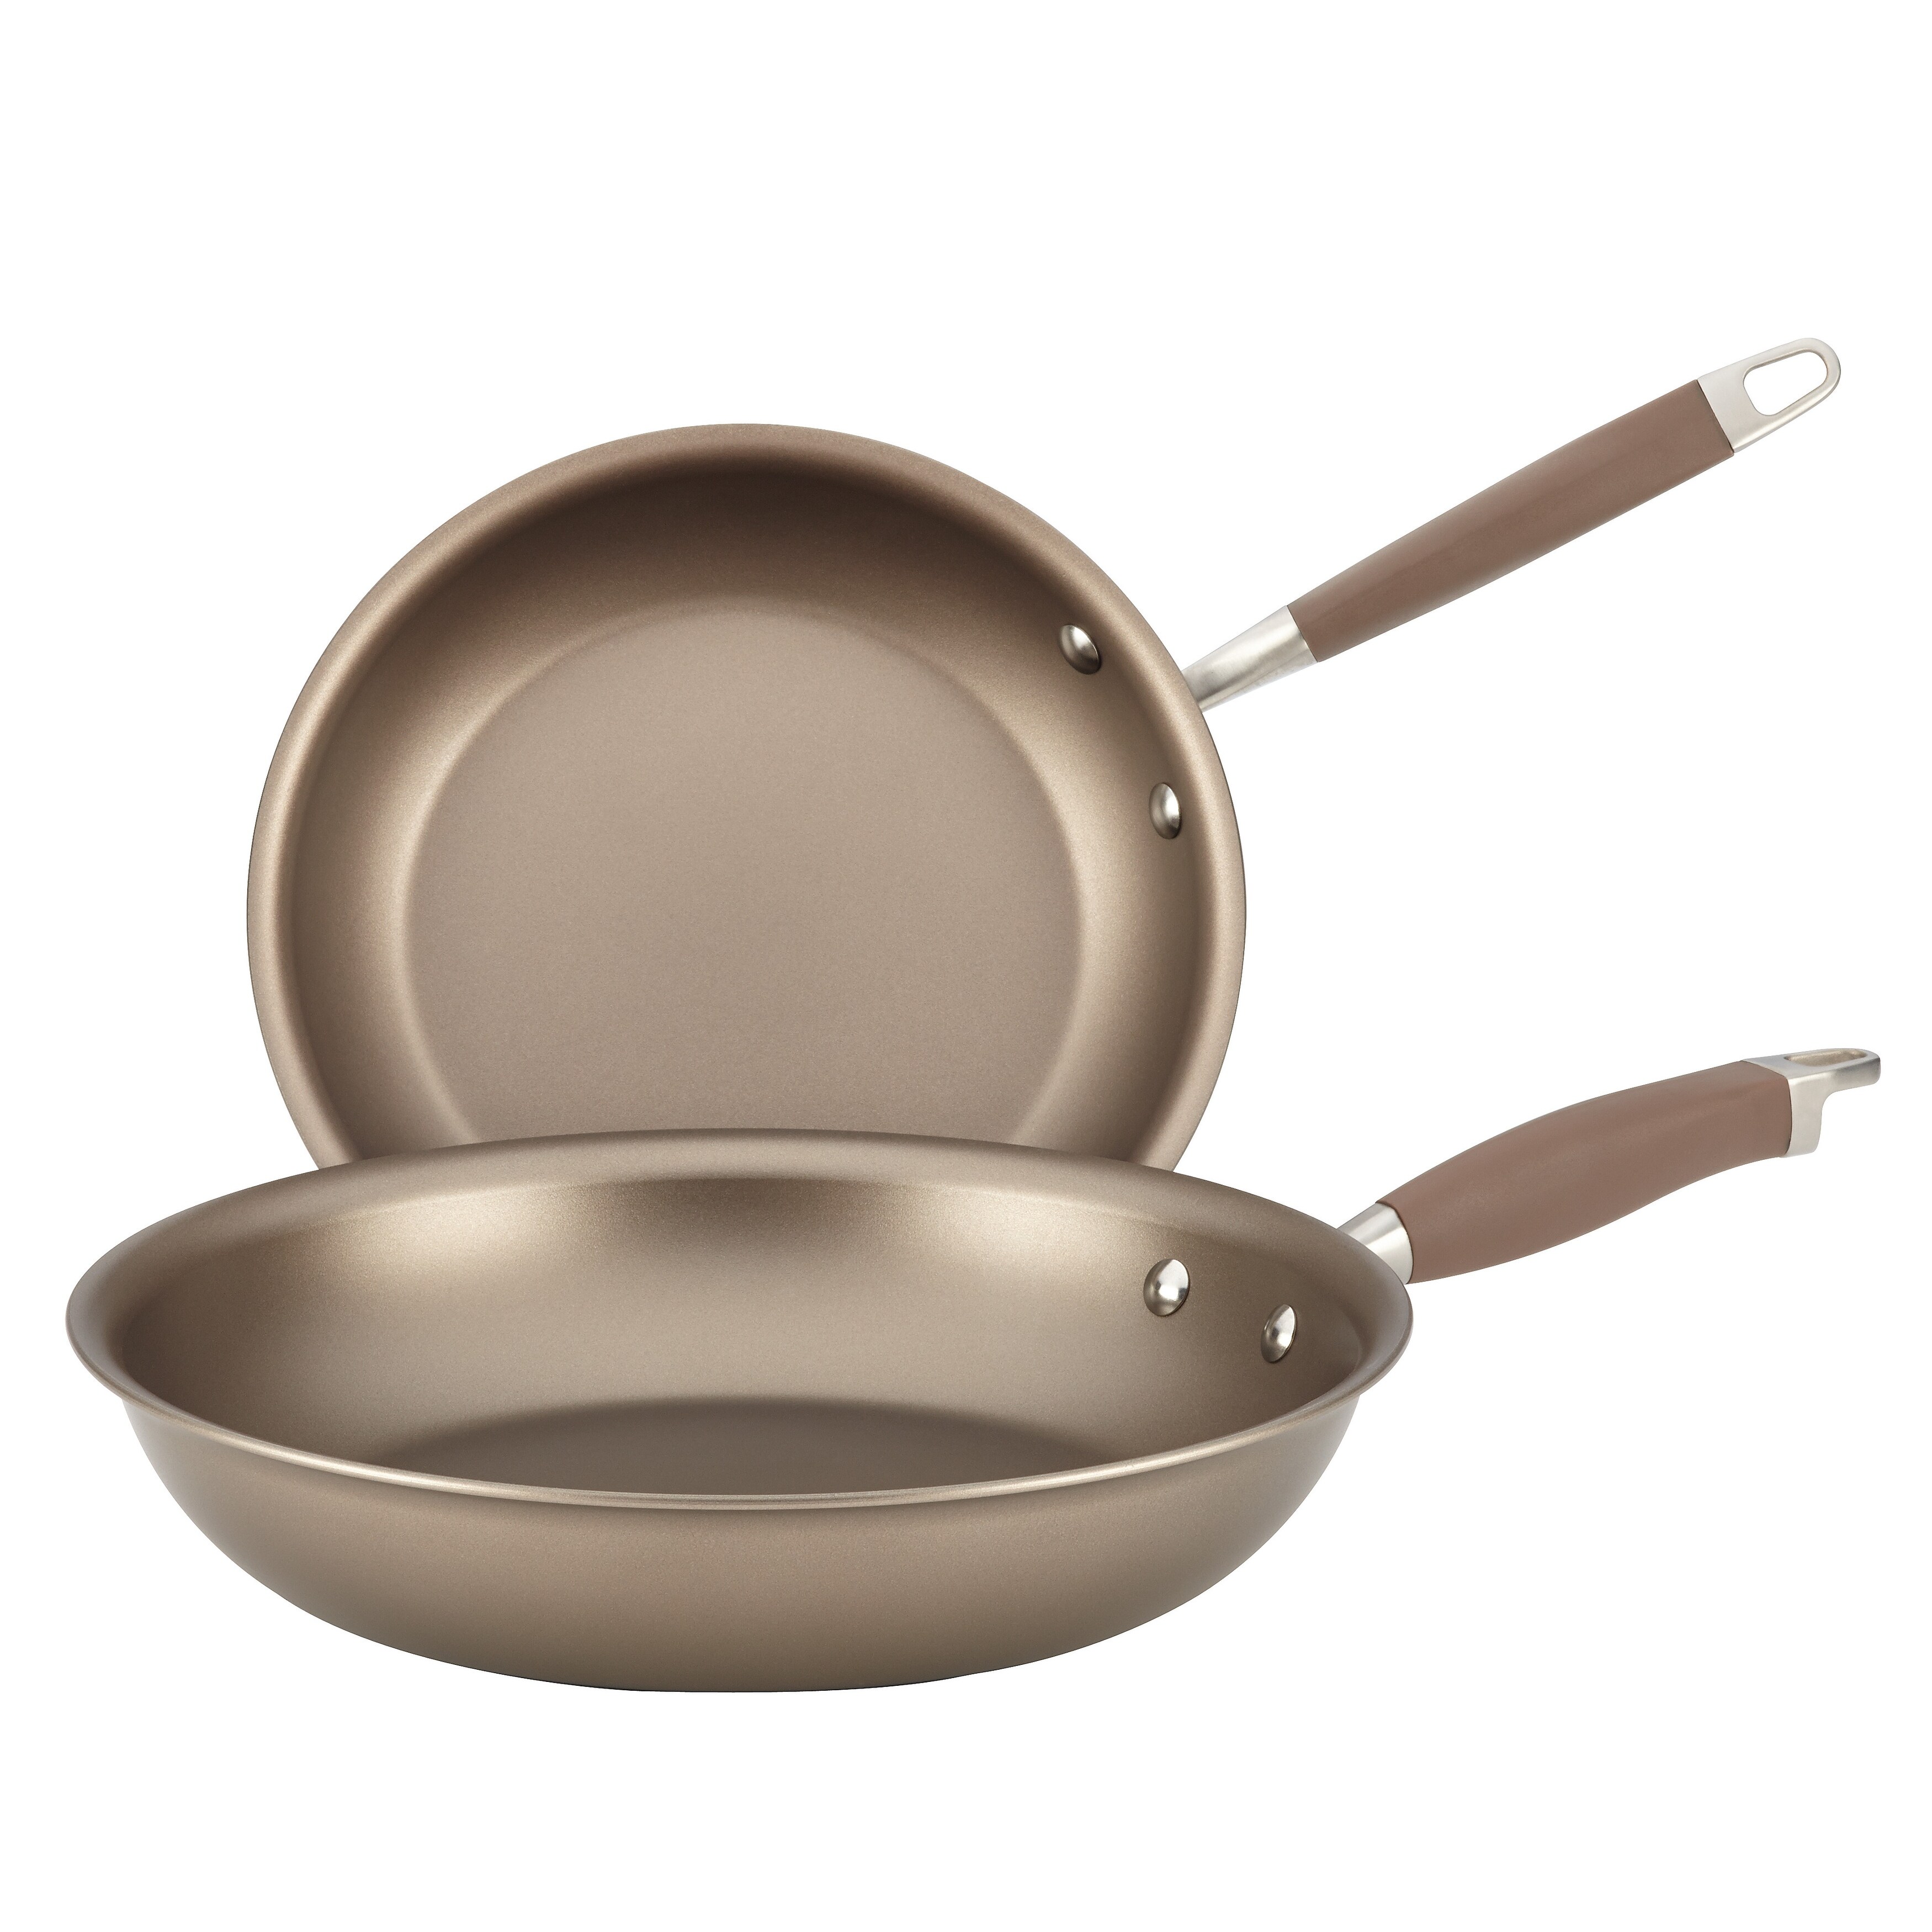 https://ak1.ostkcdn.com/images/products/is/images/direct/c53b2f944377ada64cbddfa7fb5031e7184d9650/Anolon-Advanced-Umber-Hard-Anodized-Nonstick-Twin-Pack-10-Inch-and-12-Inch-French-Skillets.jpg